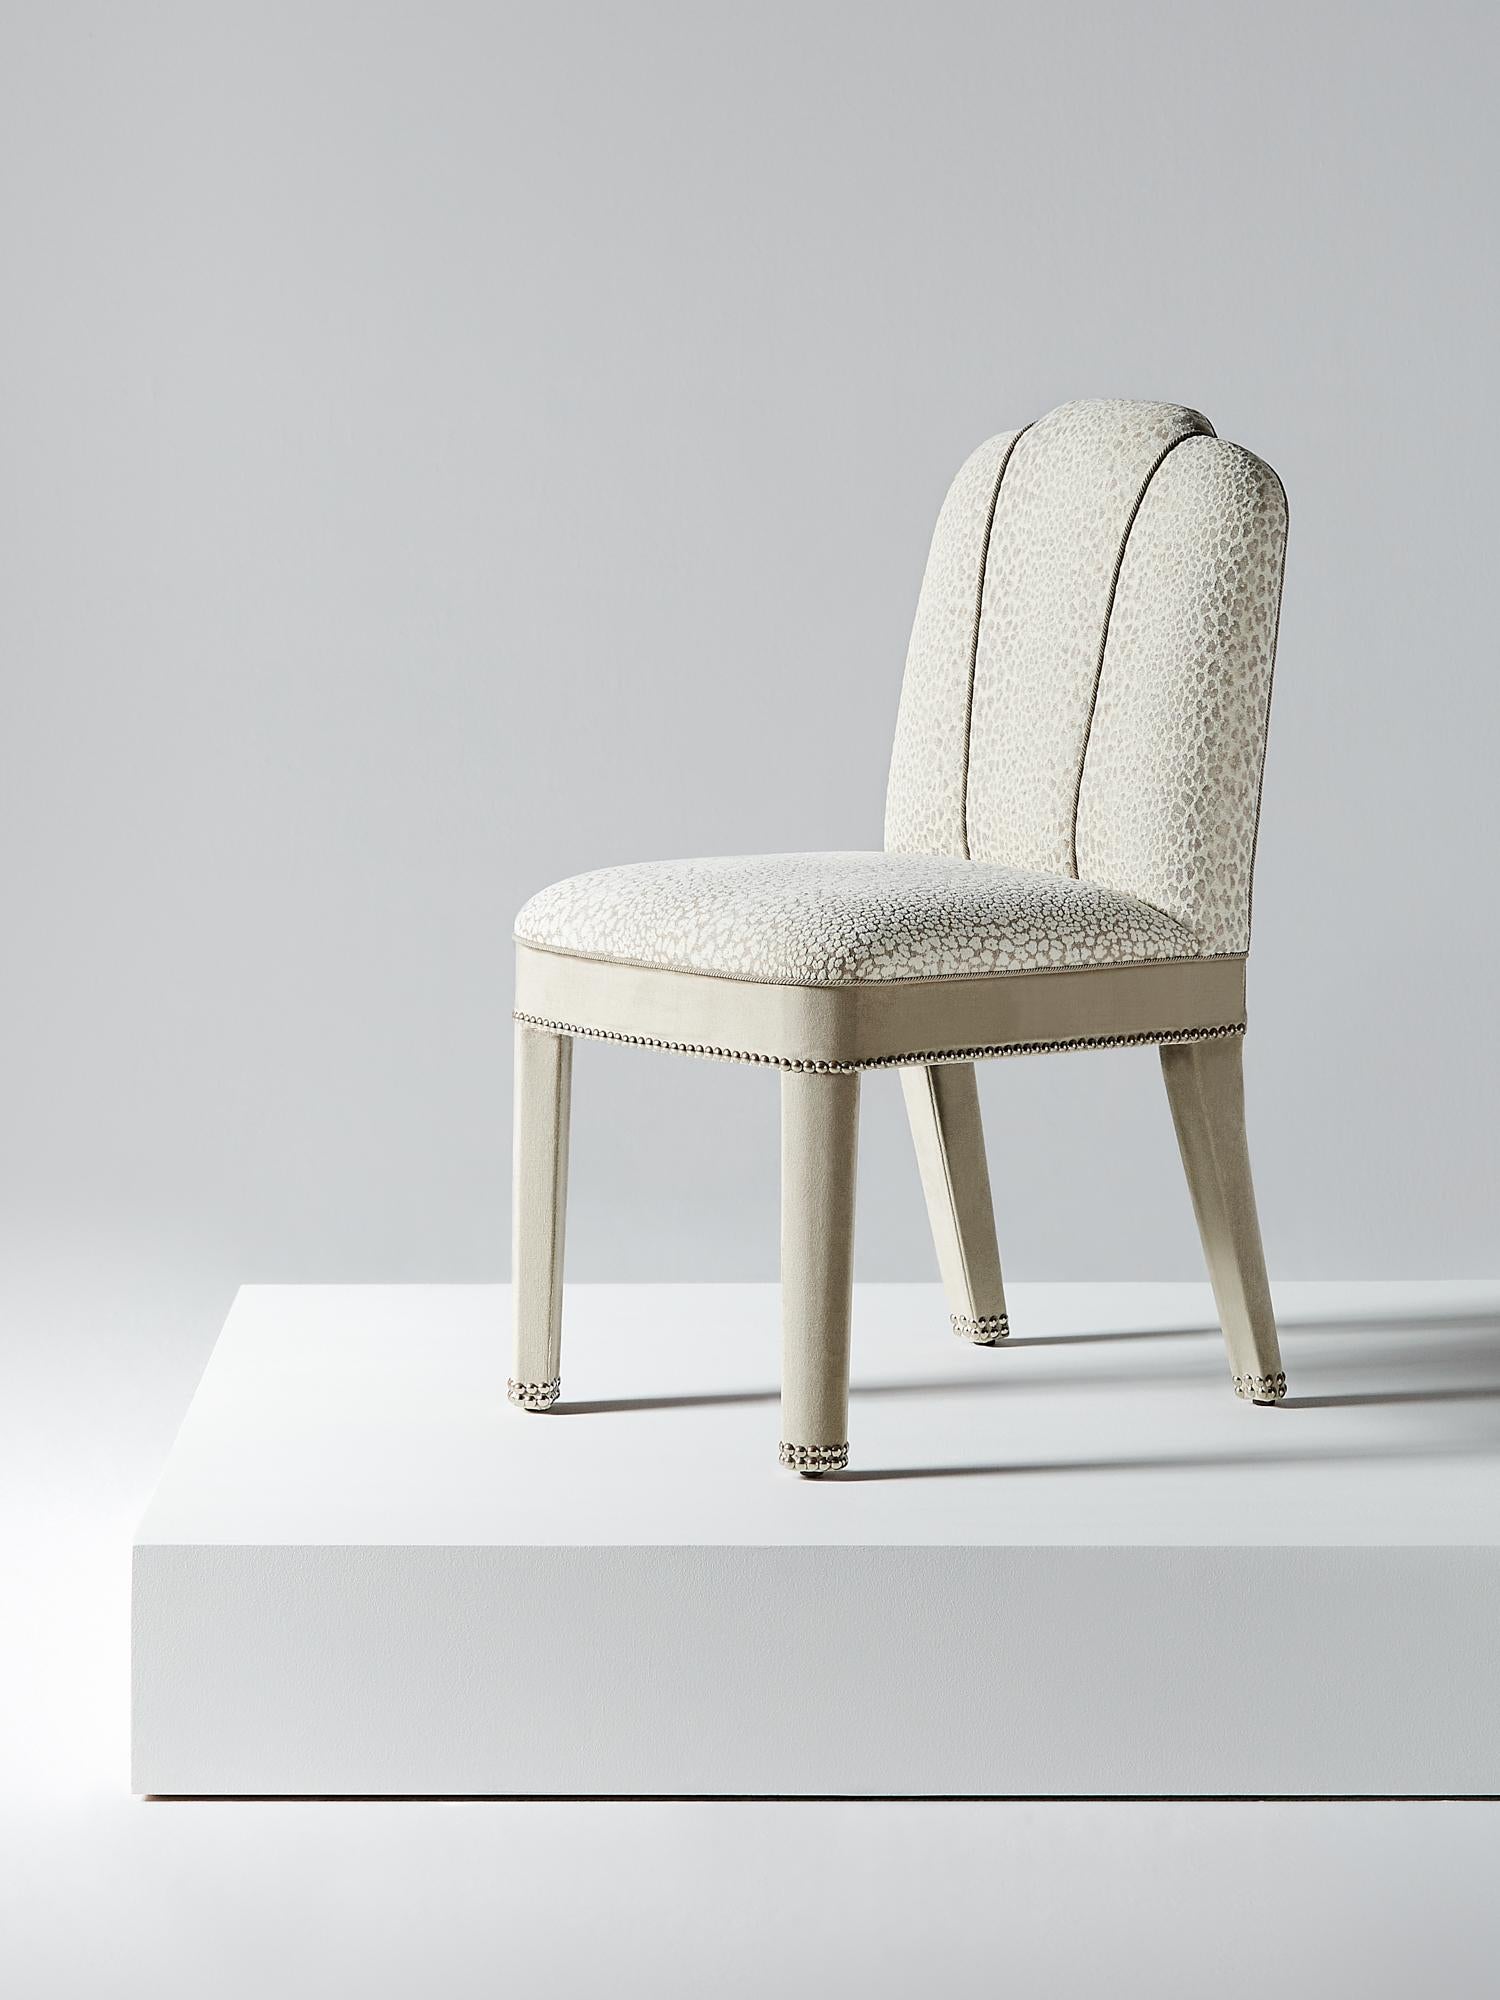 And Objects, product design studio founded by Martin Brudnizki and Nick Jeanes based in London.

A contemporary twist on the Classic upholstered dining chair, the Abbas dining chair perfectly supports its sitter’s back whilst remaining stylish.